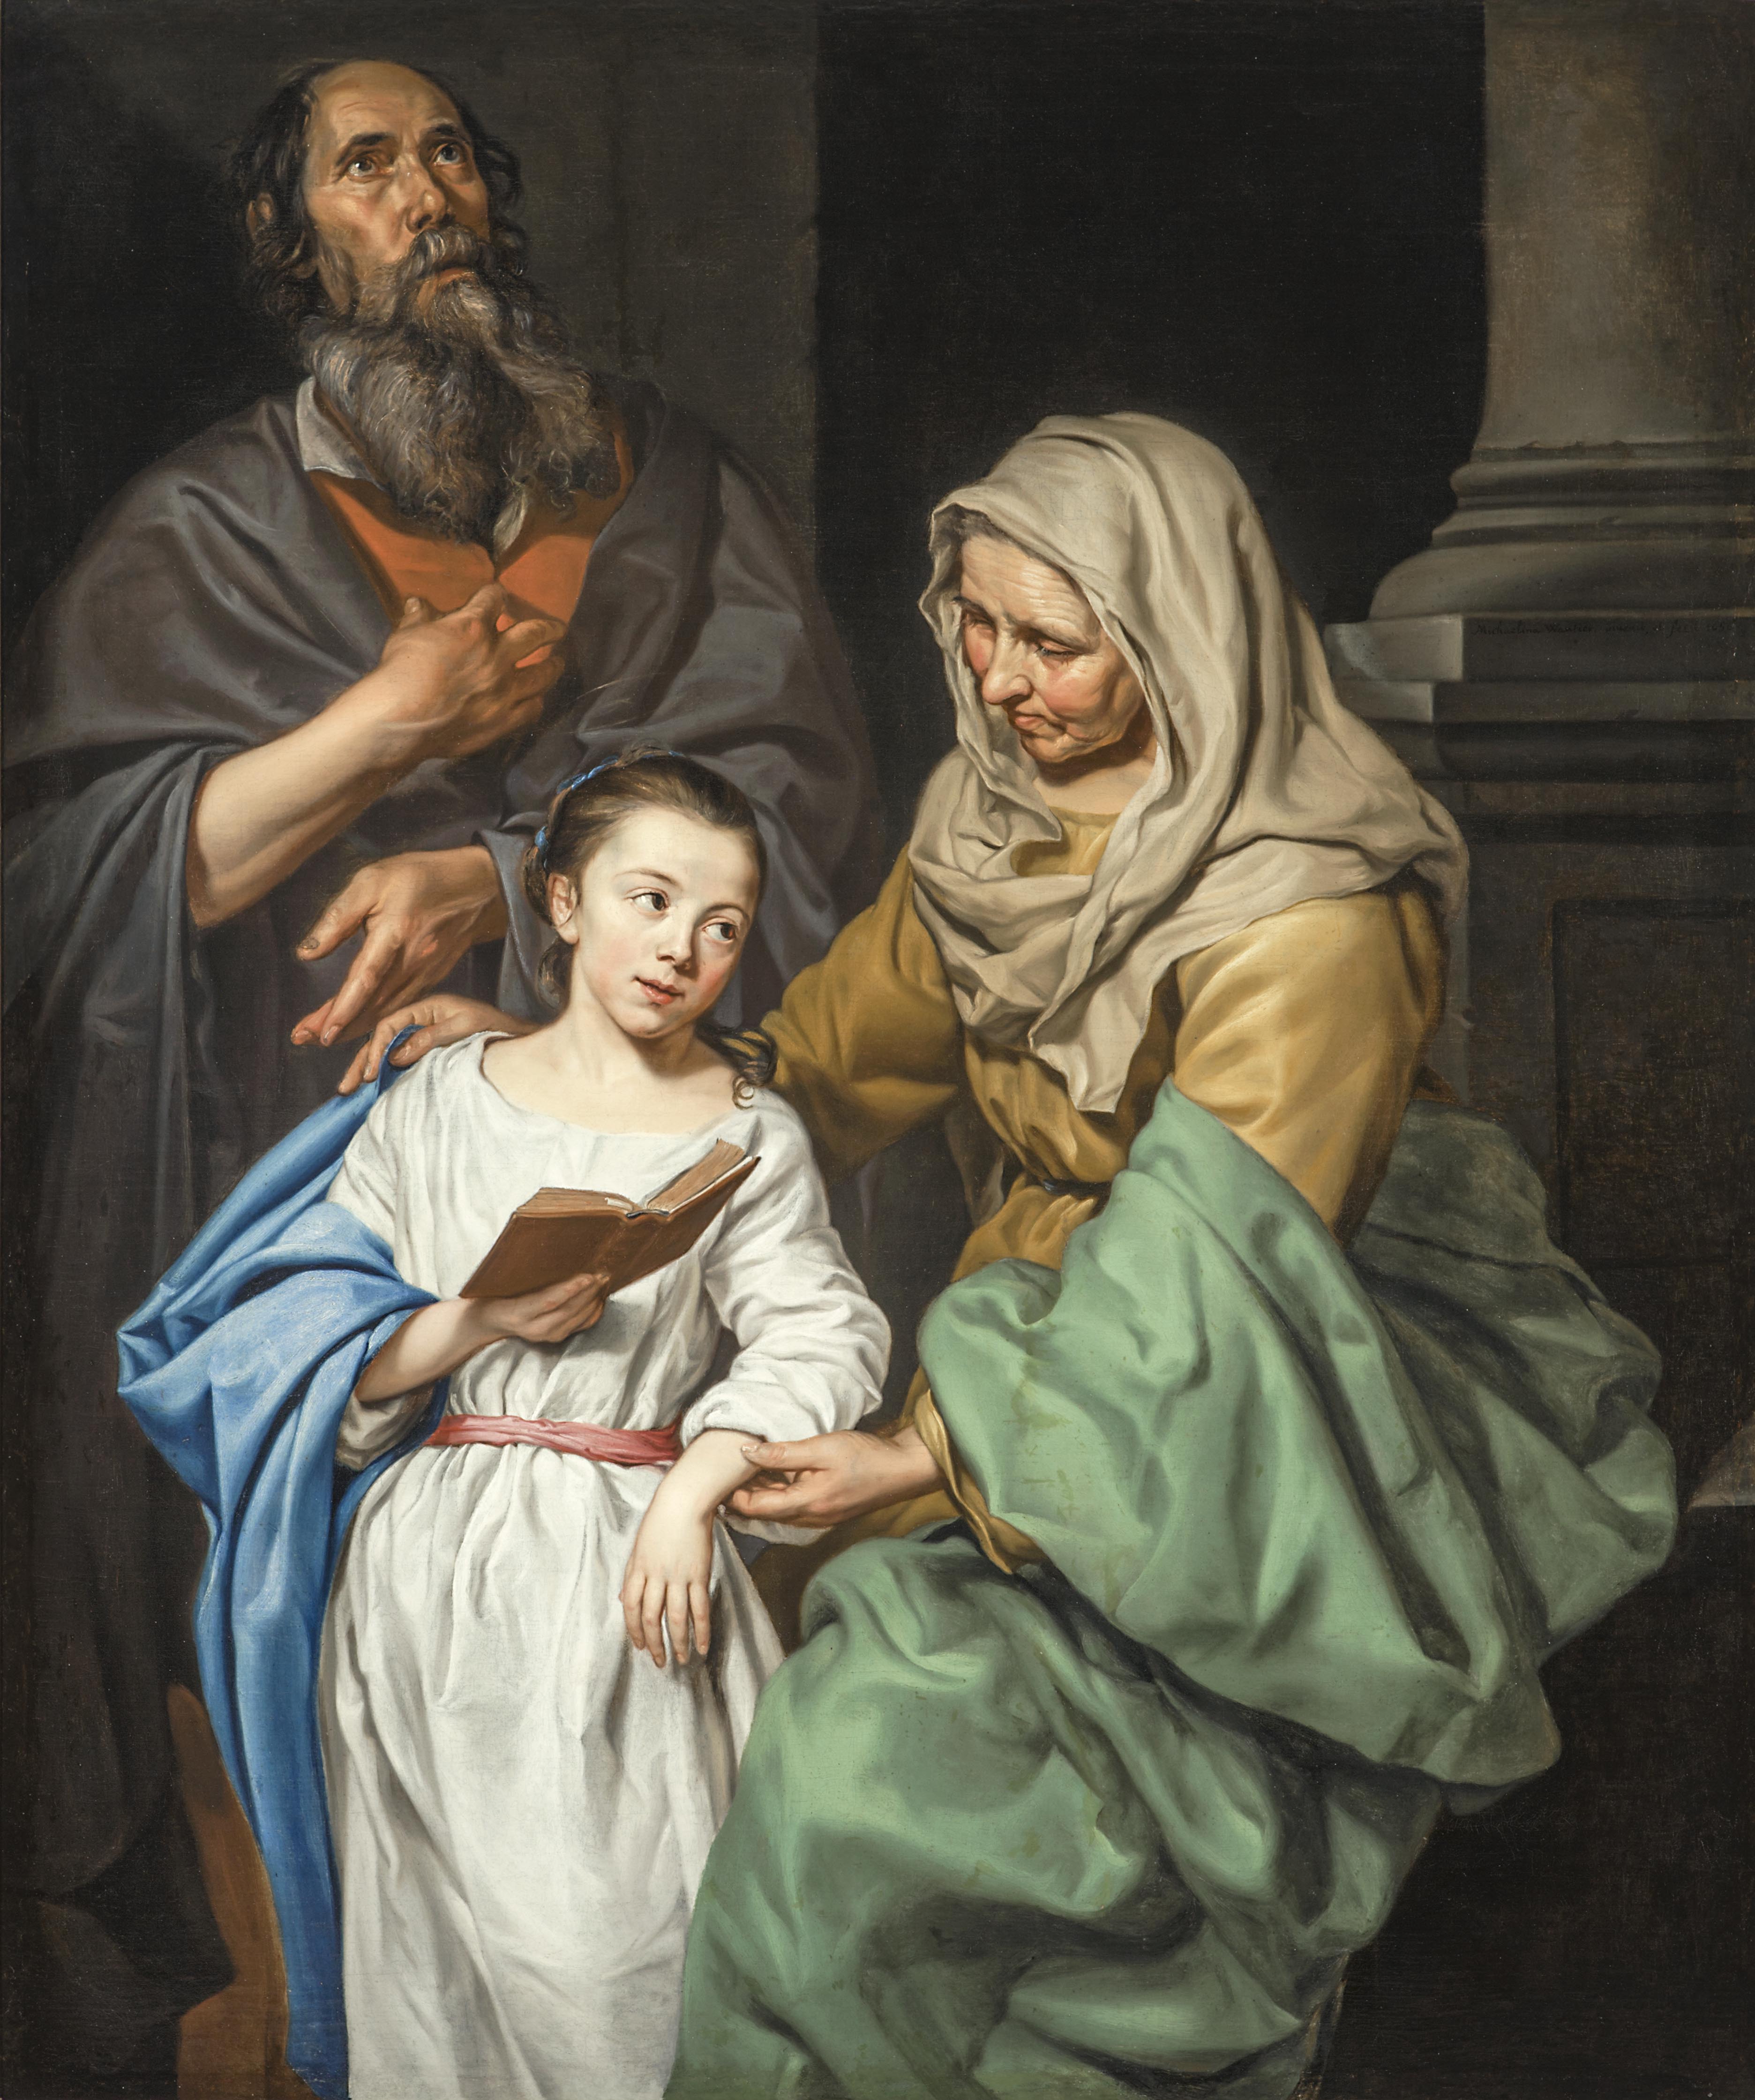 The Education of the Virgin by Michaelina Wautier - 1656 - 124 x 147 cm Mauritshuis, The Hague